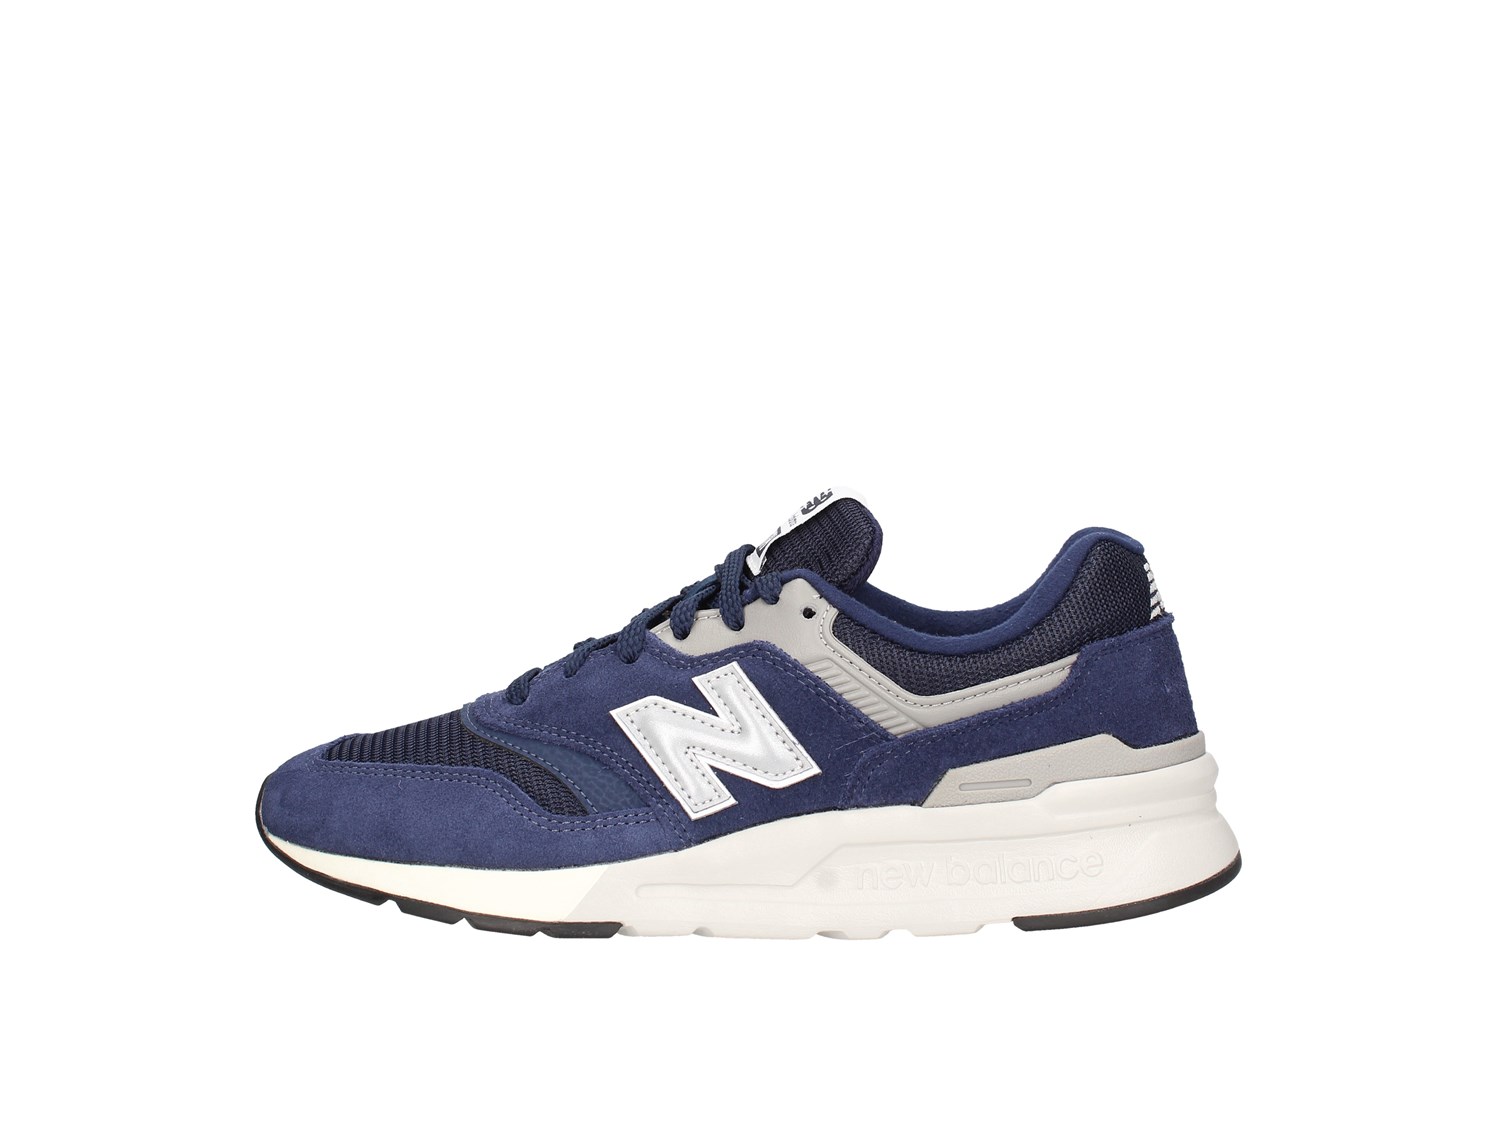 New Balance Cm997hce Blue Shoes Man Sneakers